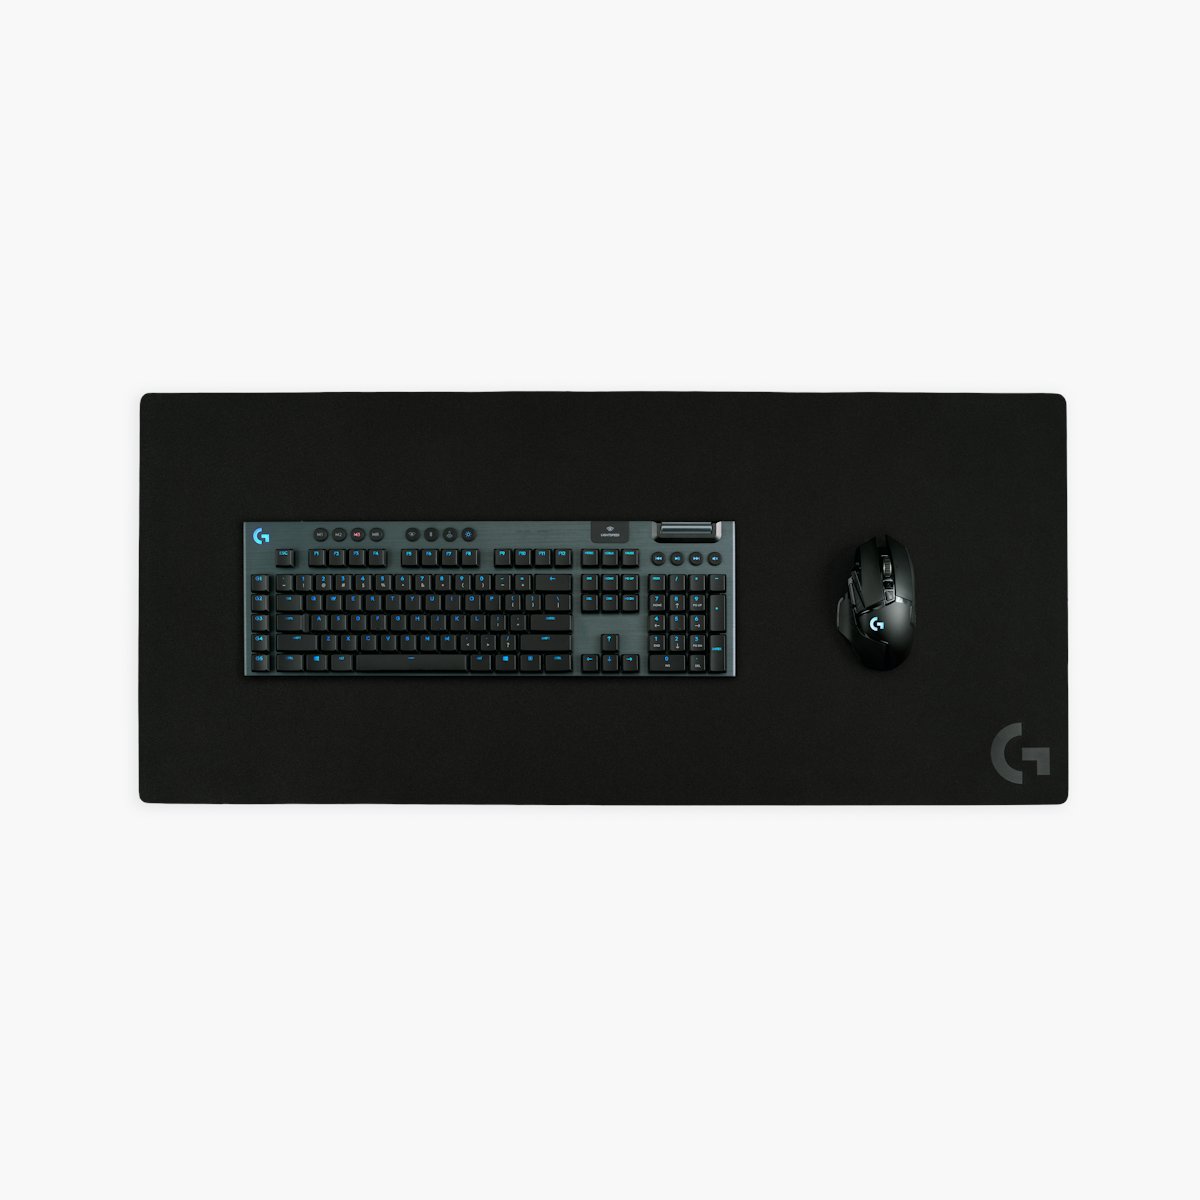 G840 XL Gaming Mouse Pad